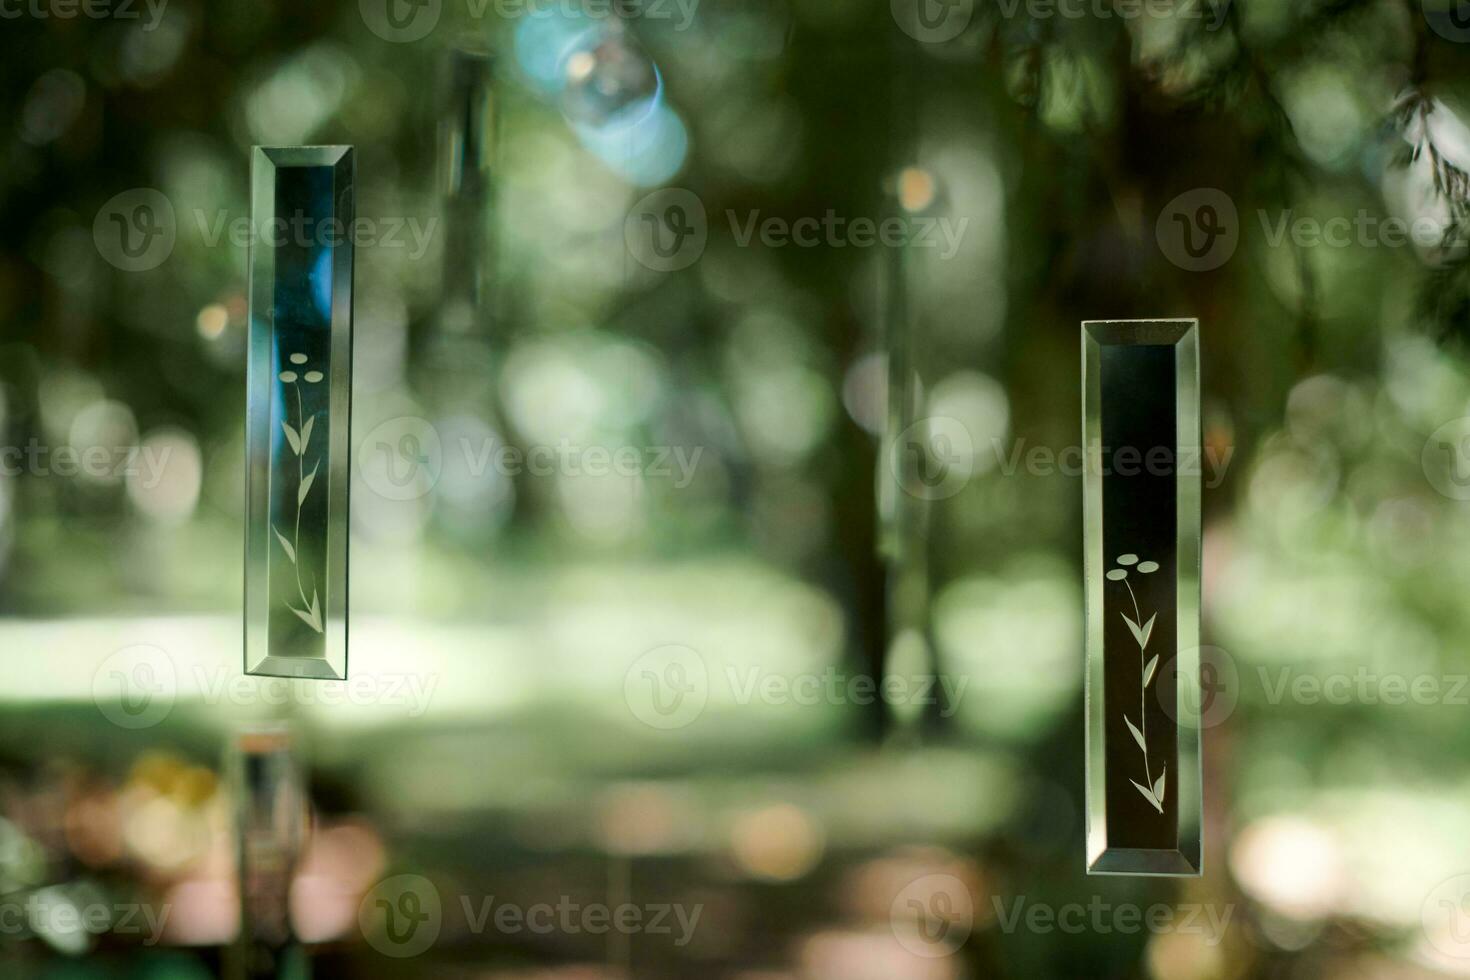 Transparent glass decorative art objects in green forest at outdoor art exhibition photo